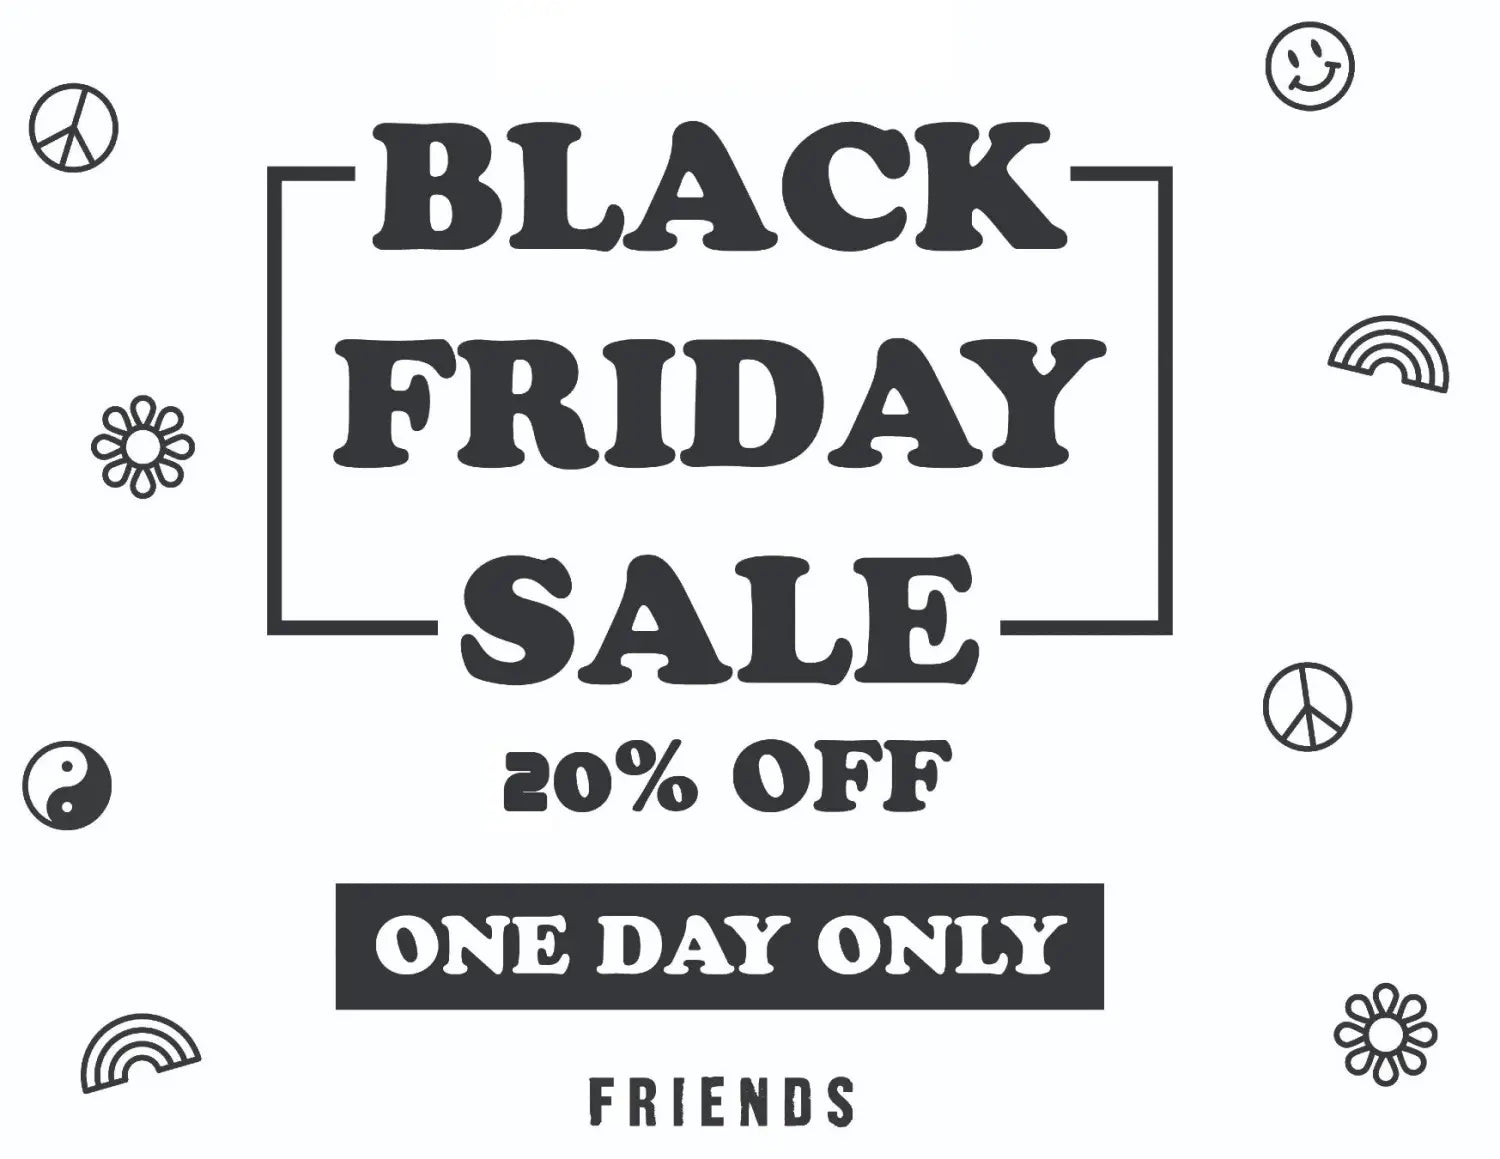 Black Friday Deal! (In Store Only)